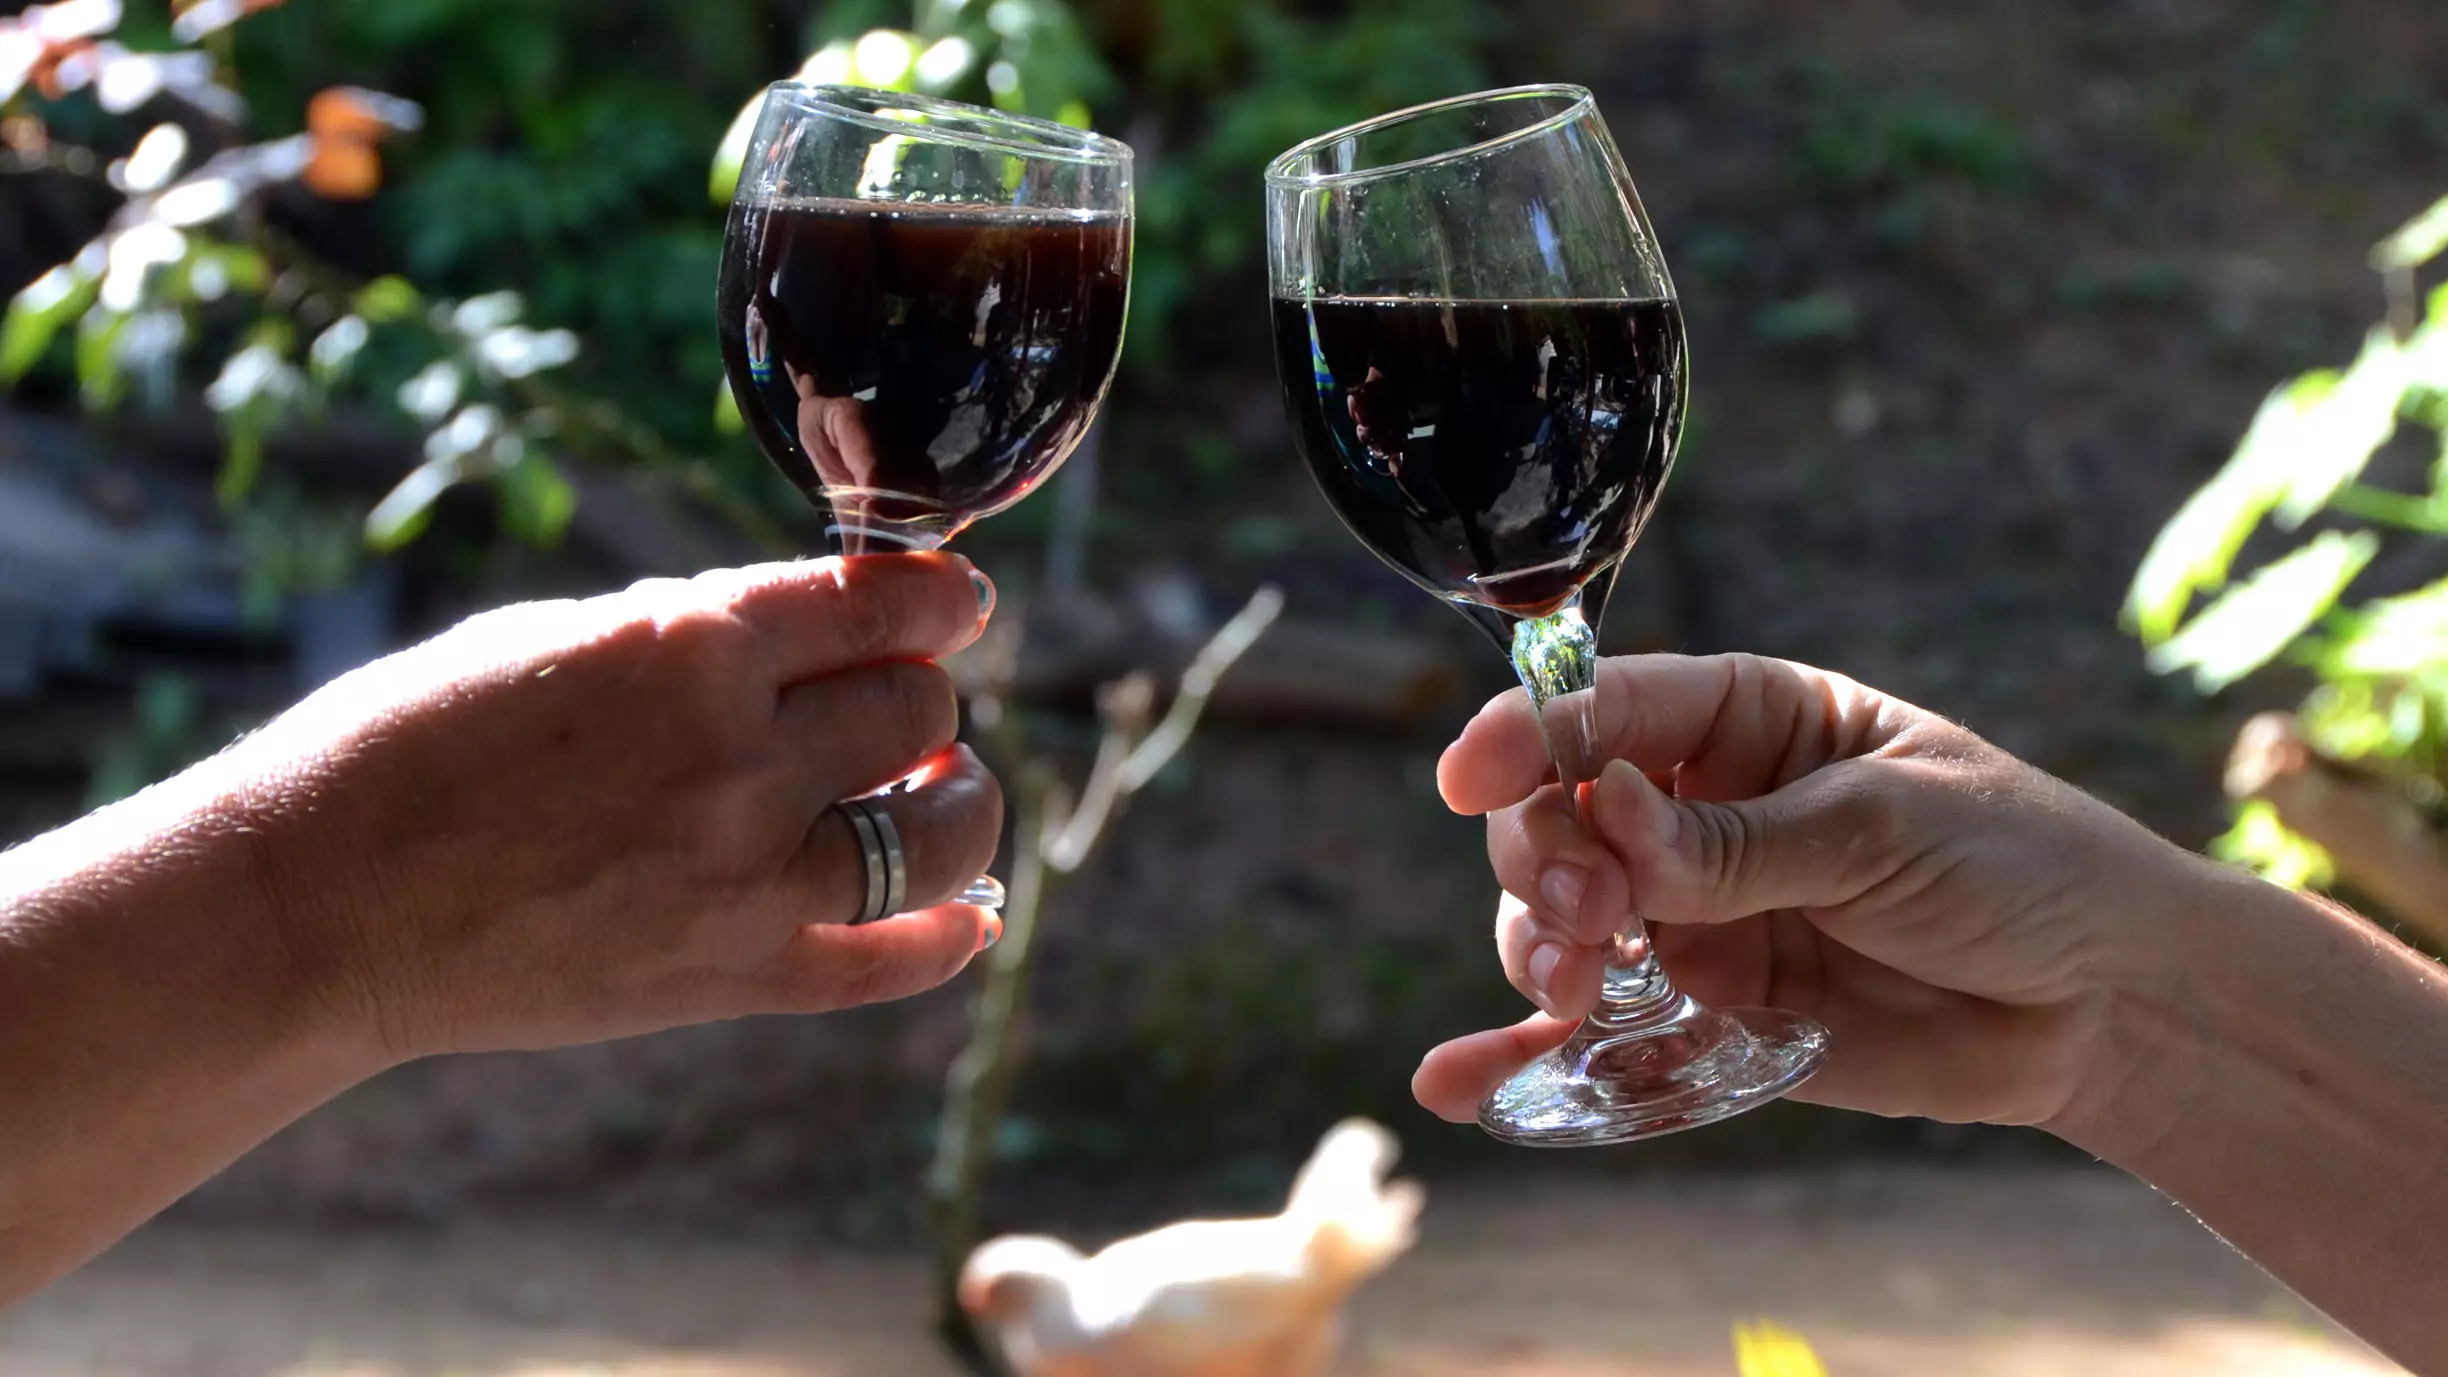 Try Not To Panic, But There's Going To Be A Global Wine Shortage